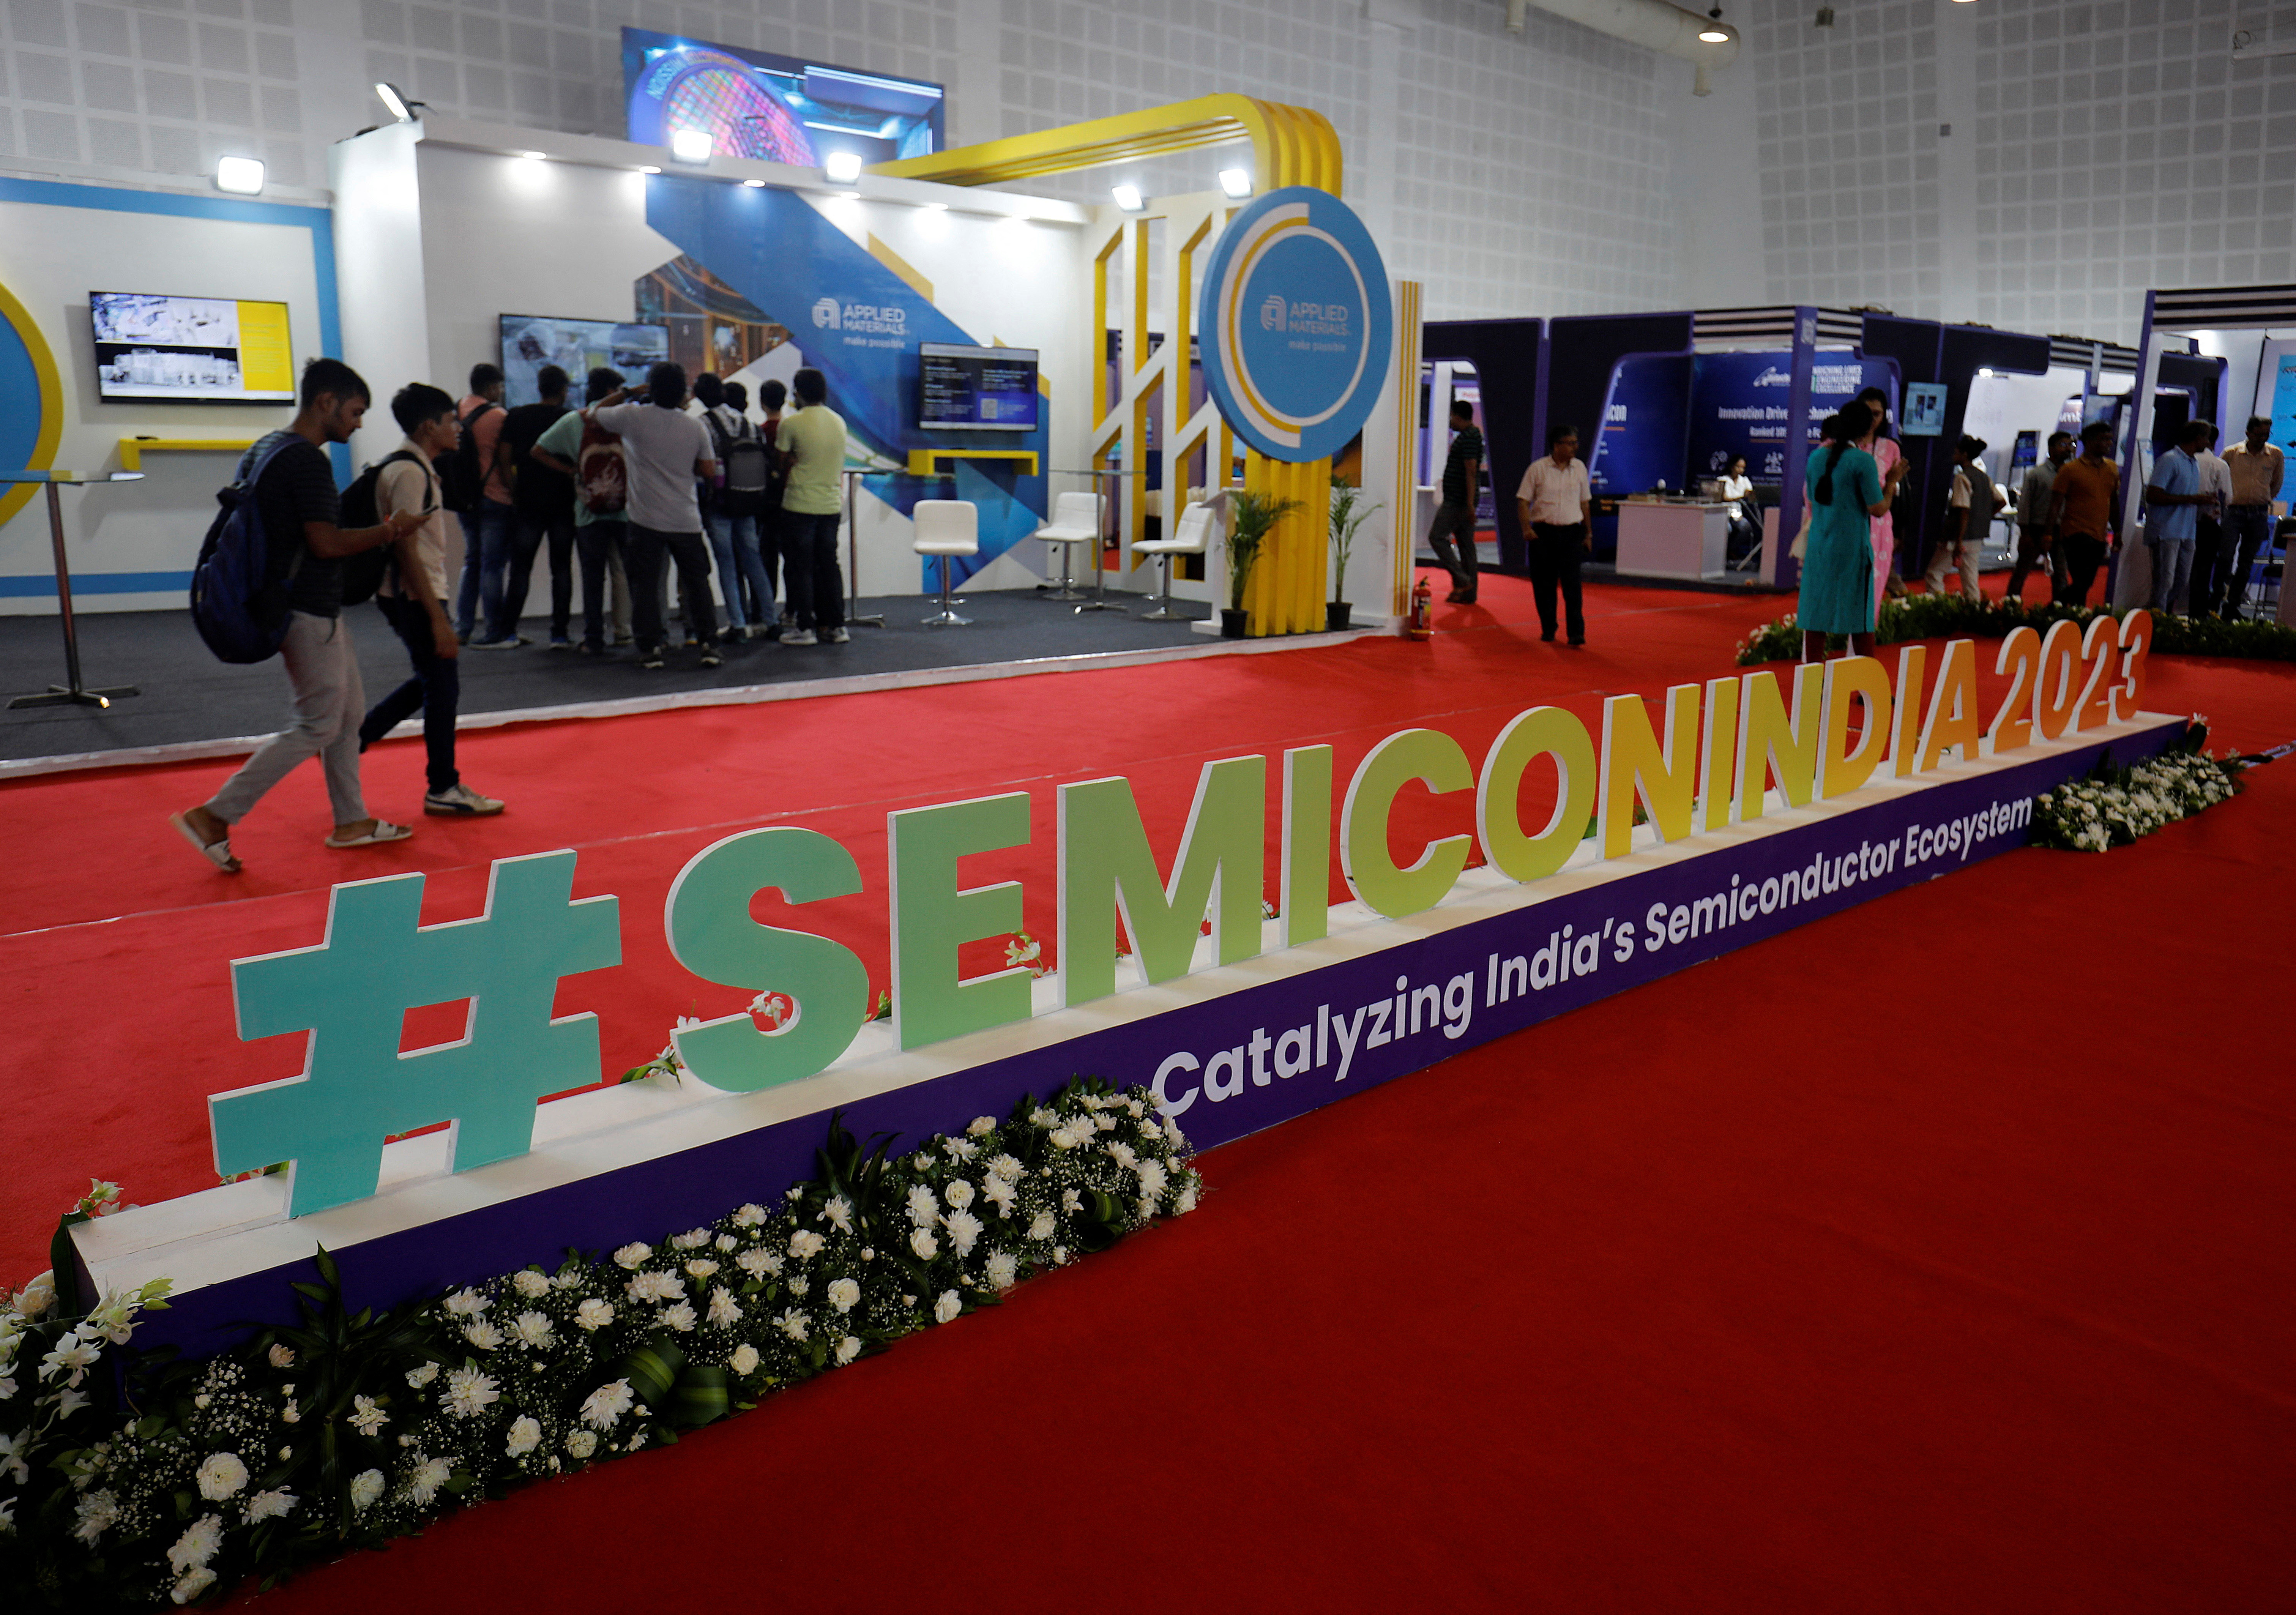 Visitors gather at Applied Materials and Micron Technology kiosks before the start of 'SemiconIndia 2023' in Gandhinagar